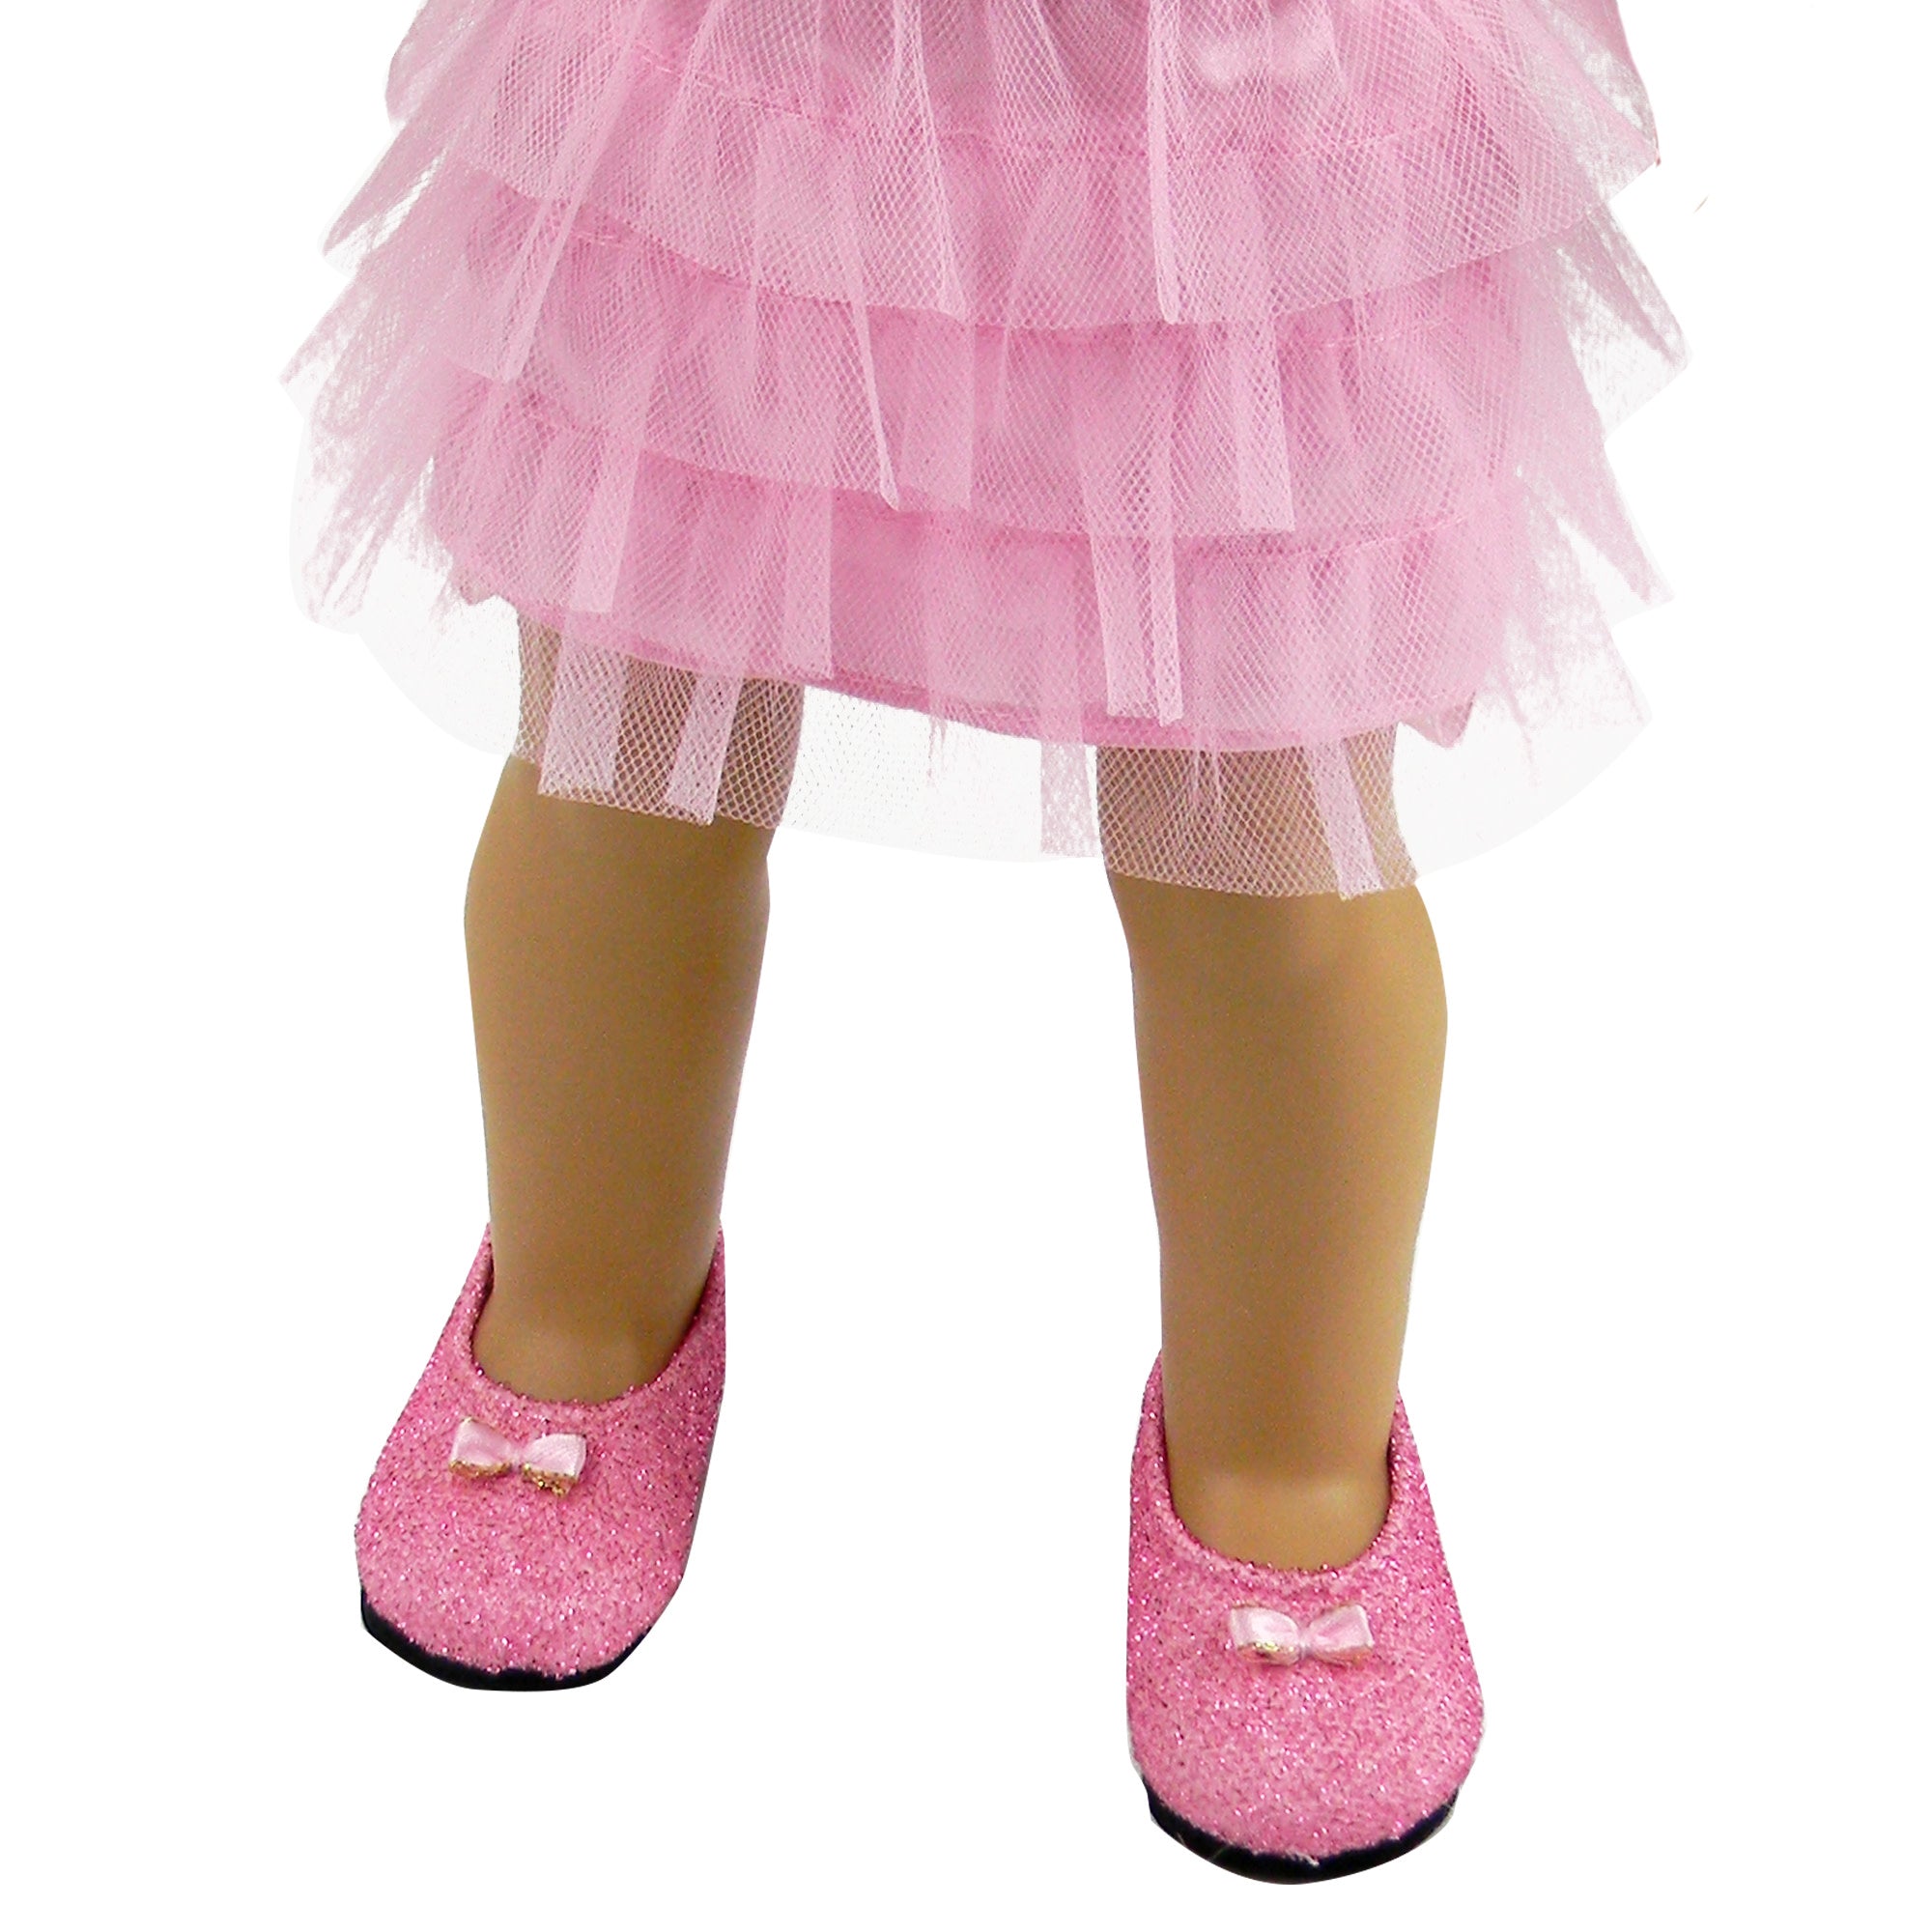 Sophia’s Pink Glitter Dress Shoes Accessory for 18" Dolls